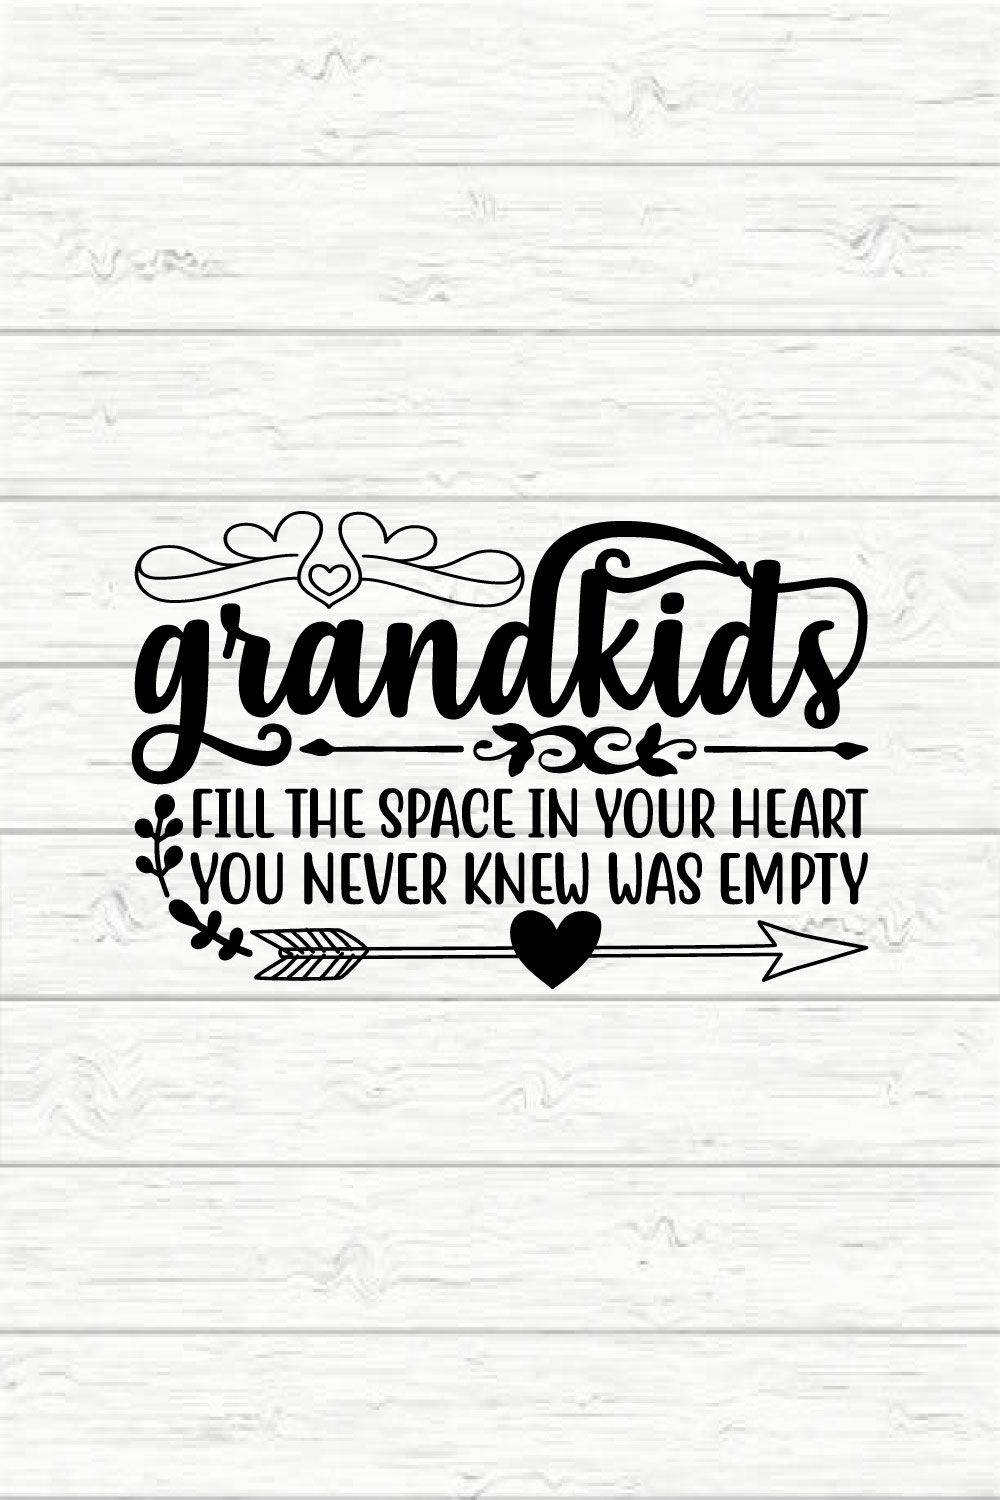 Grandkids Fill The Space In Your Heart You Never Knew Was Empty pinterest preview image.